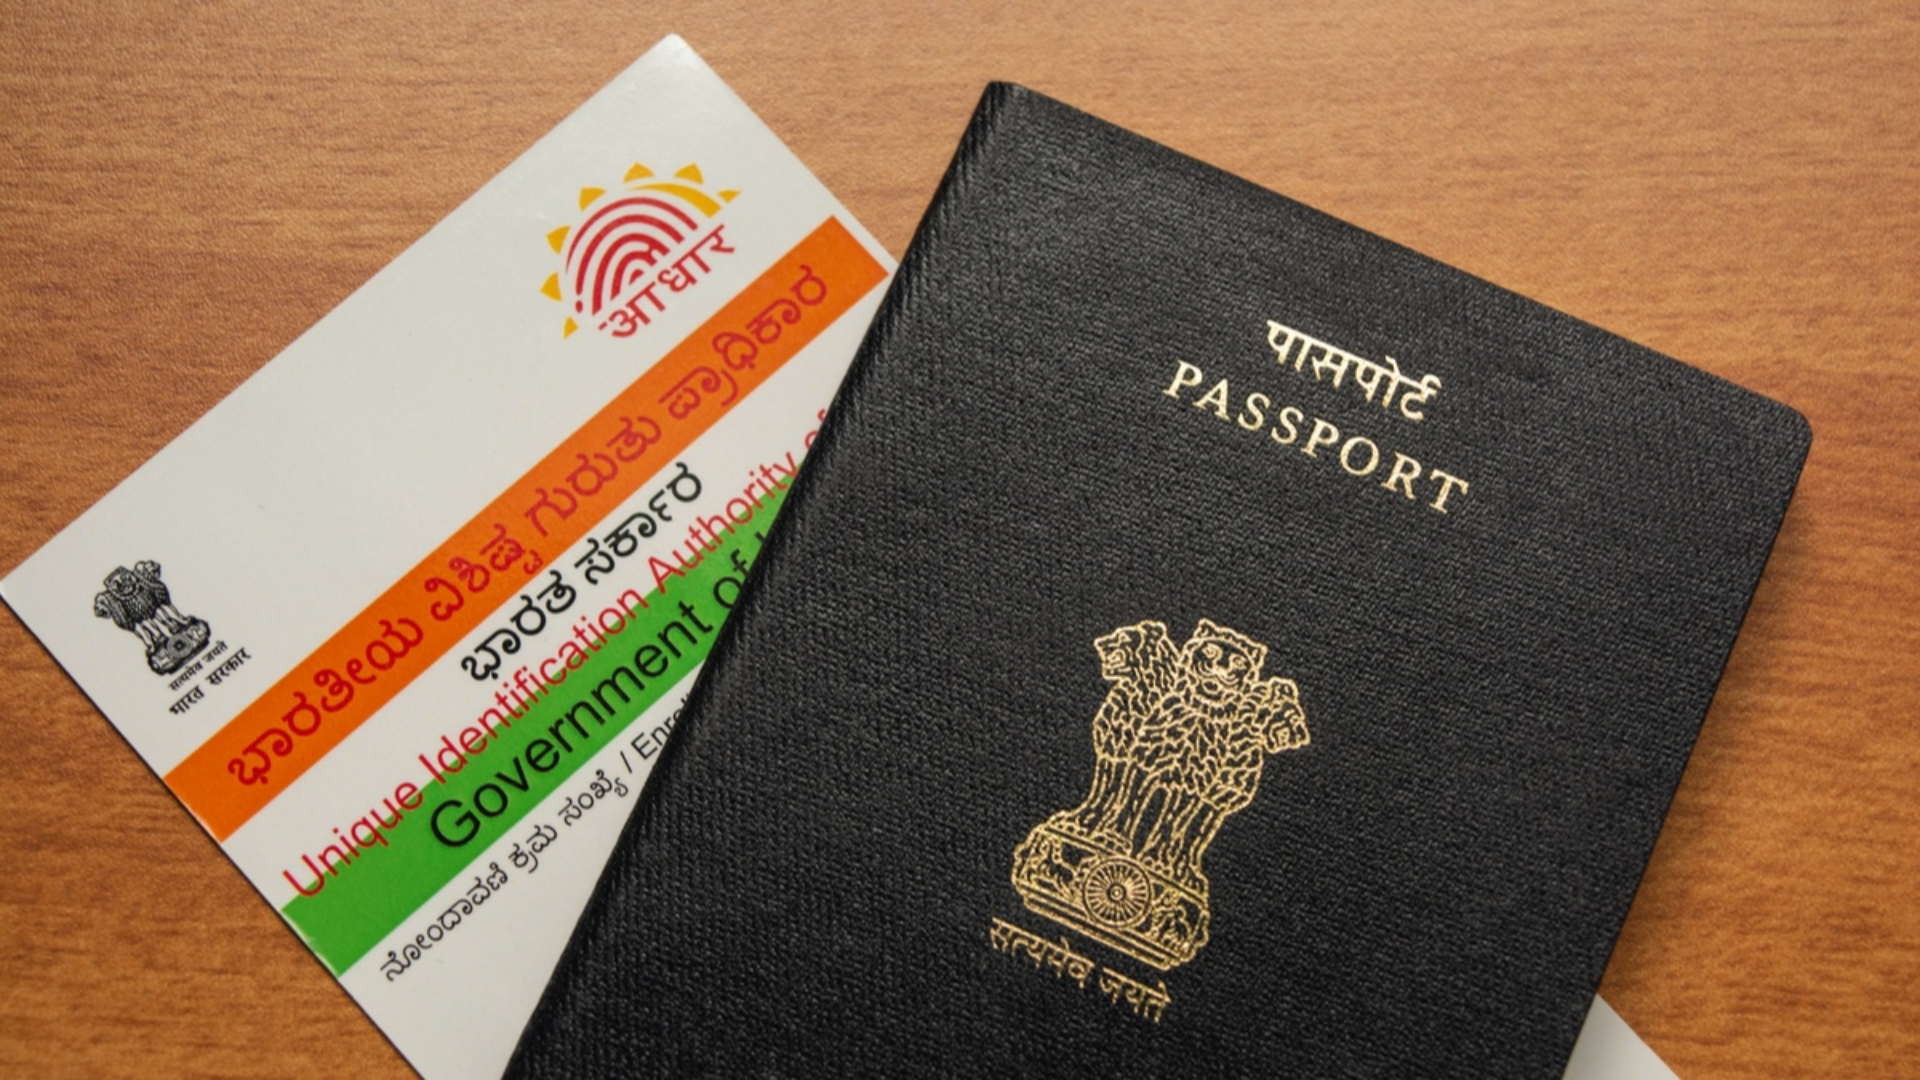 Can NRIs Issue an Aadhaar Card? All You Need To Know